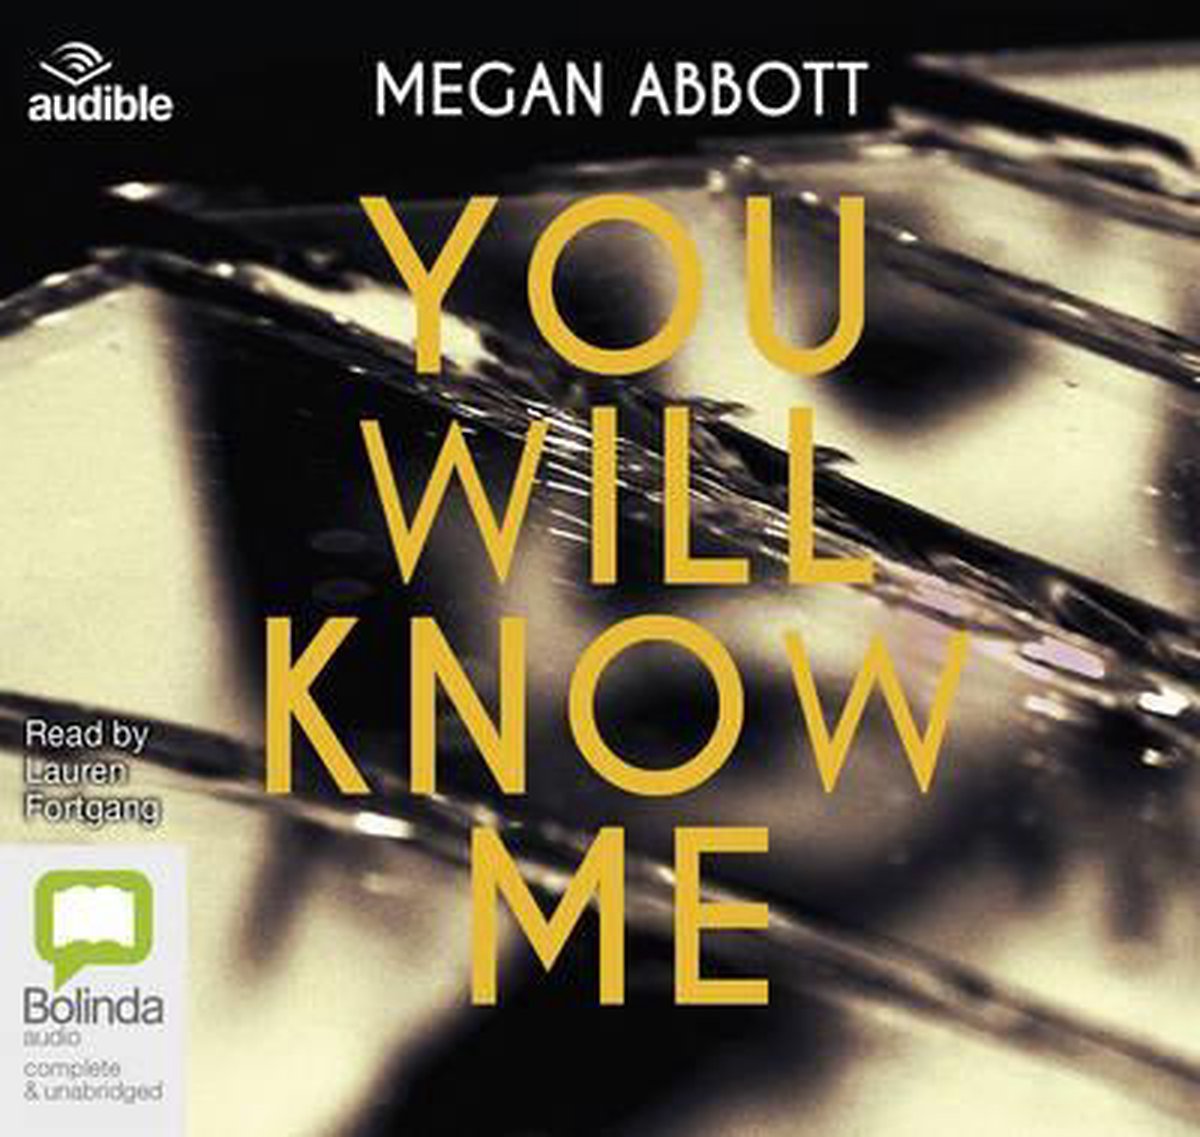 you will know me by megan abbott